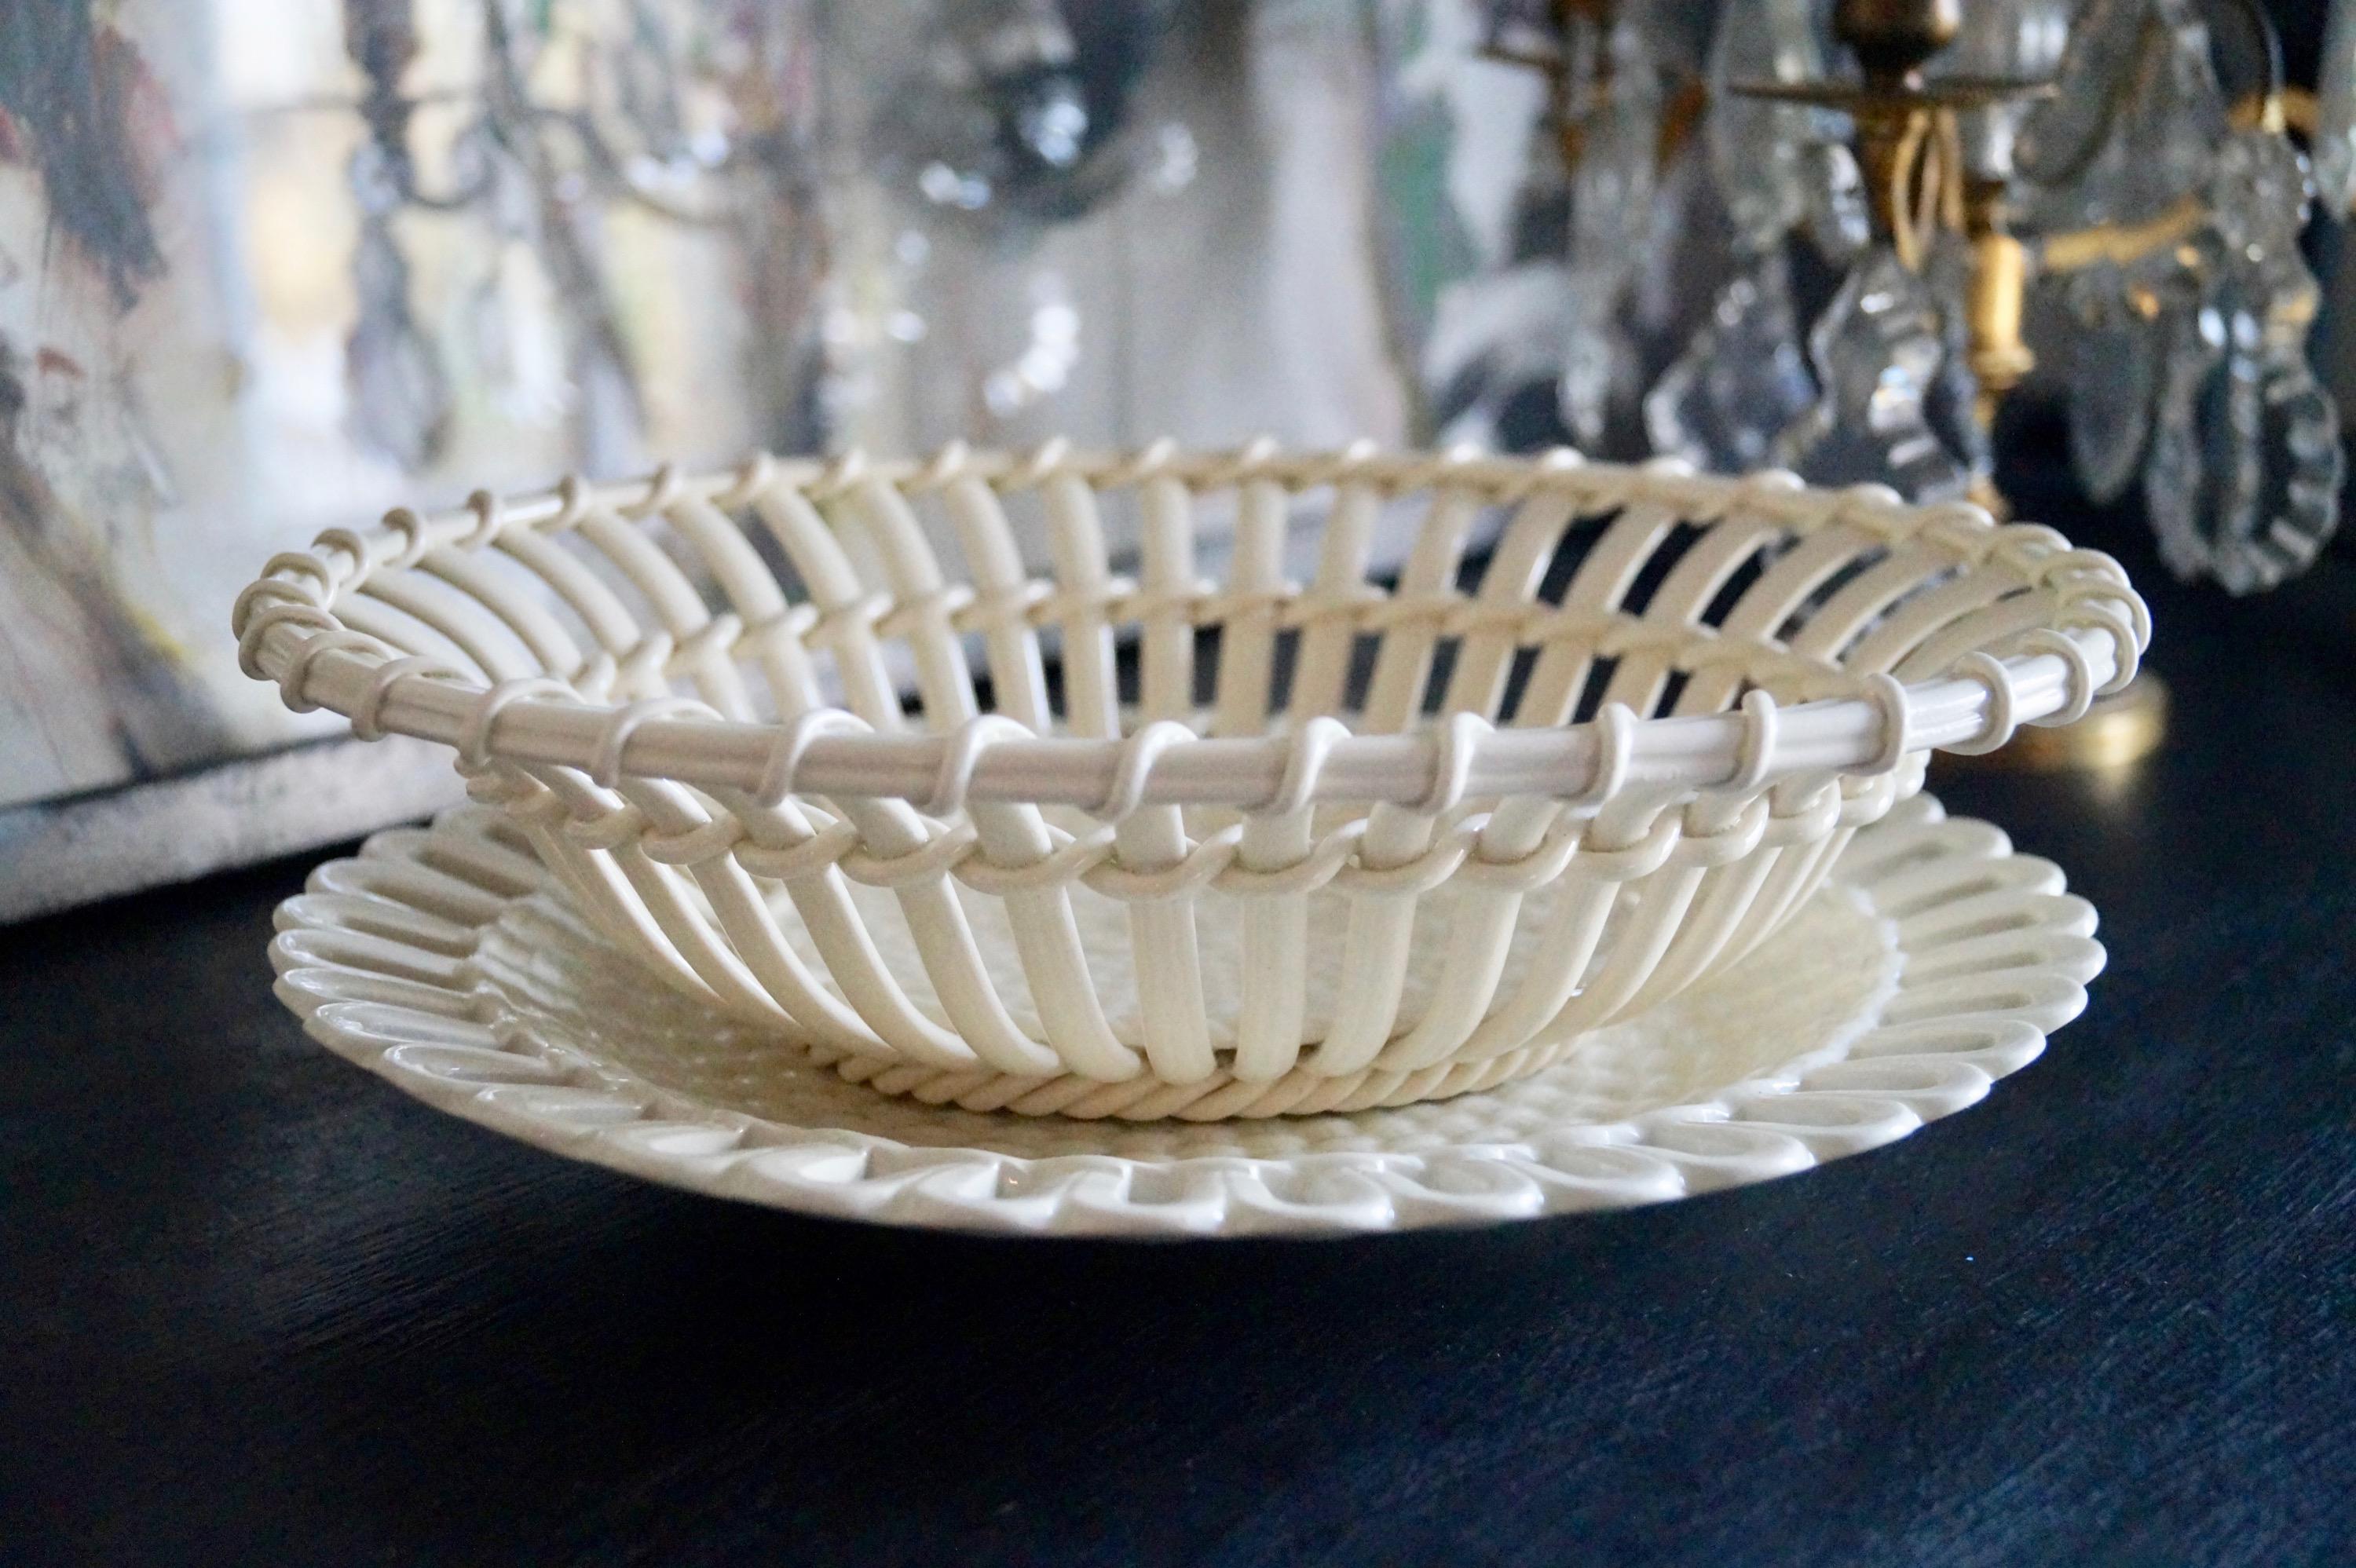 Antique Wedgwood creamware basket with under plate, England, circa 1900
Good condition

Measures: Basket 21 cm x 26 cm, height 7 cm
Under plate 23.5 cm x 26 cm
Set is basket and under plate together.